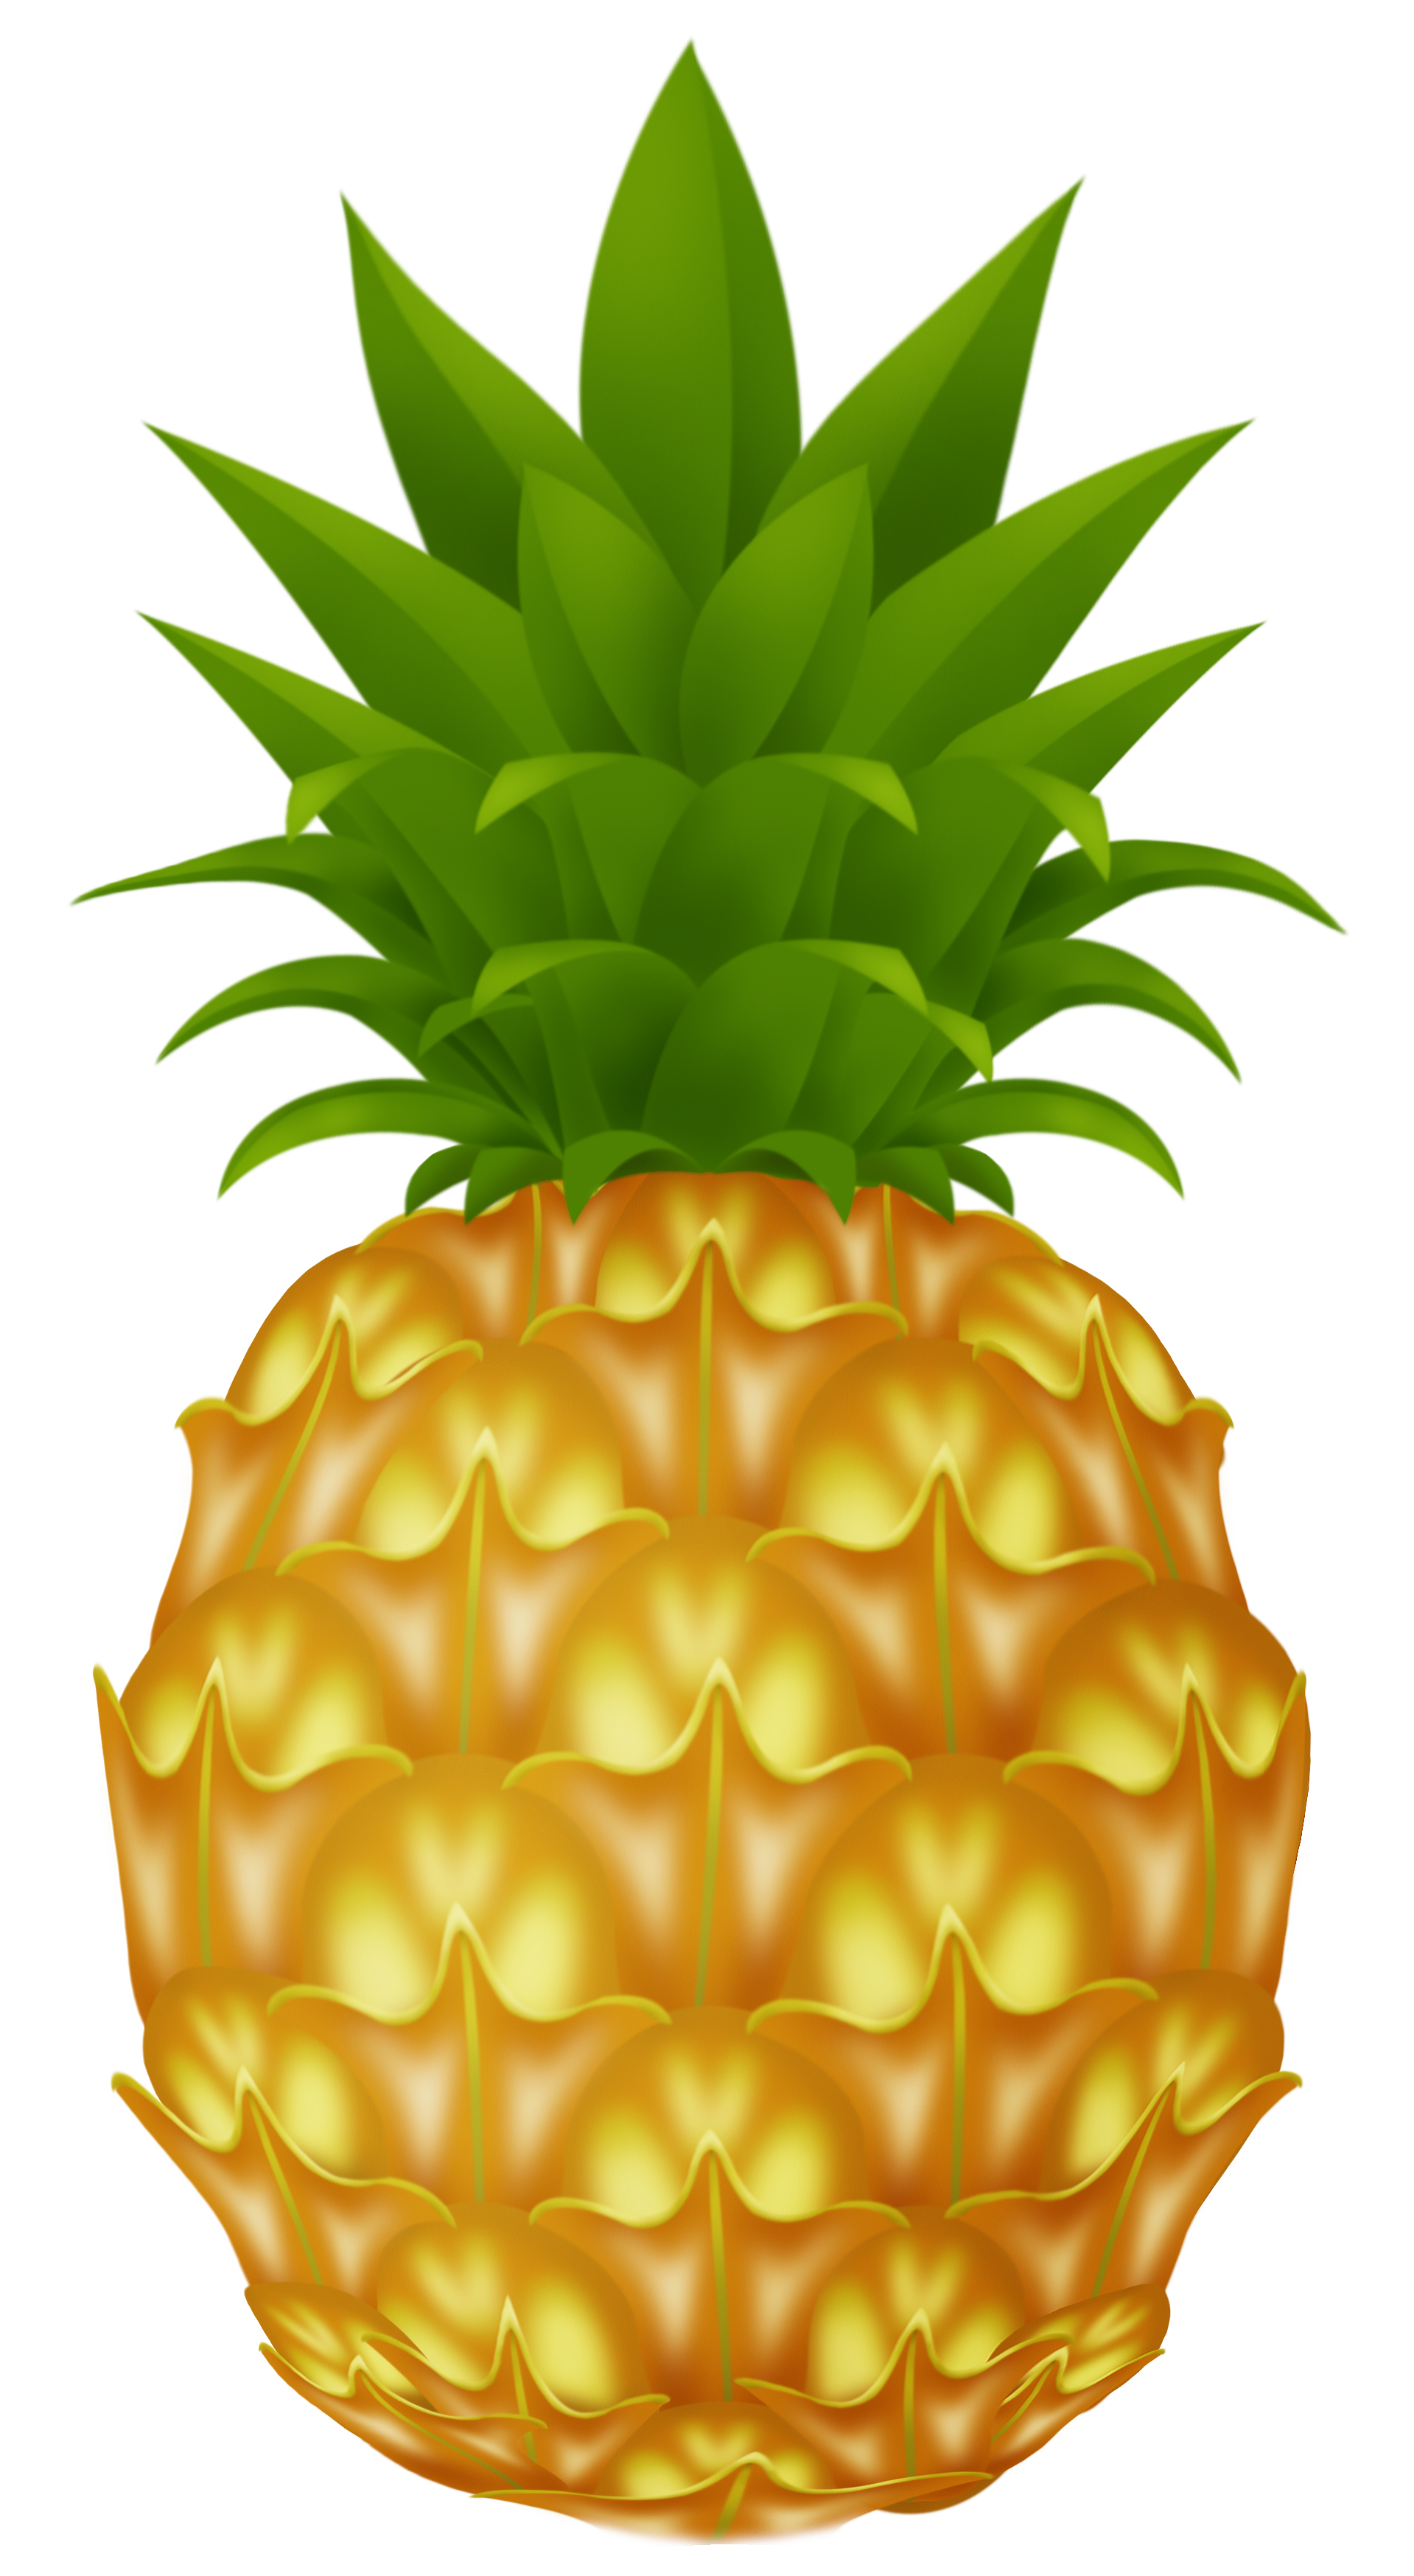 Pineapple images free pictures download clip art 3